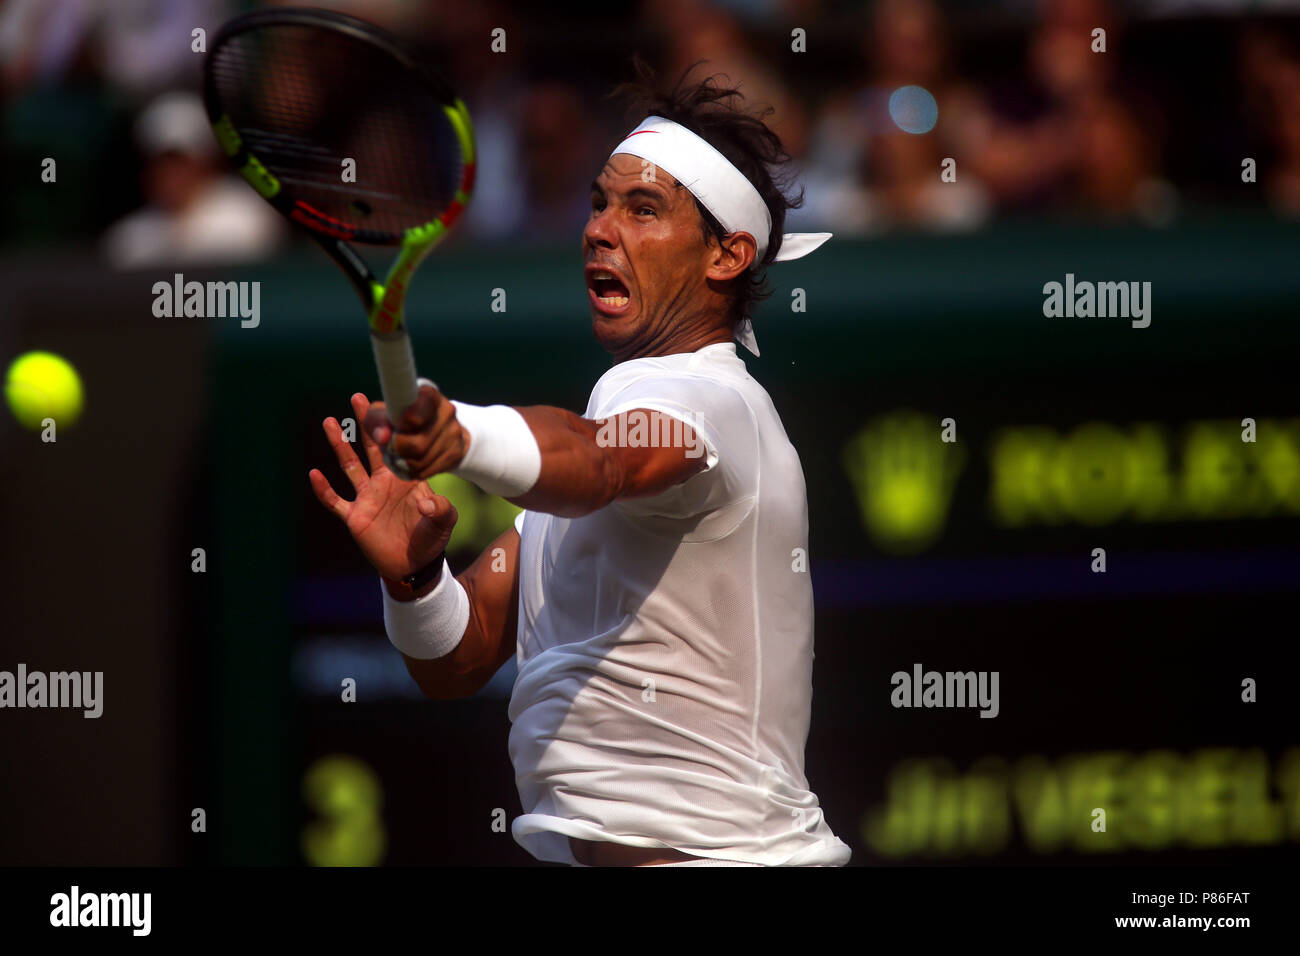 London, England - July 9, 2018.  Wimbledon Tennis: Spain's Rafael Nadal in action during his fourth round match against Jiri Vesely of the Czech Republic. Credit: Adam Stoltman/Alamy Live News Stock Photo